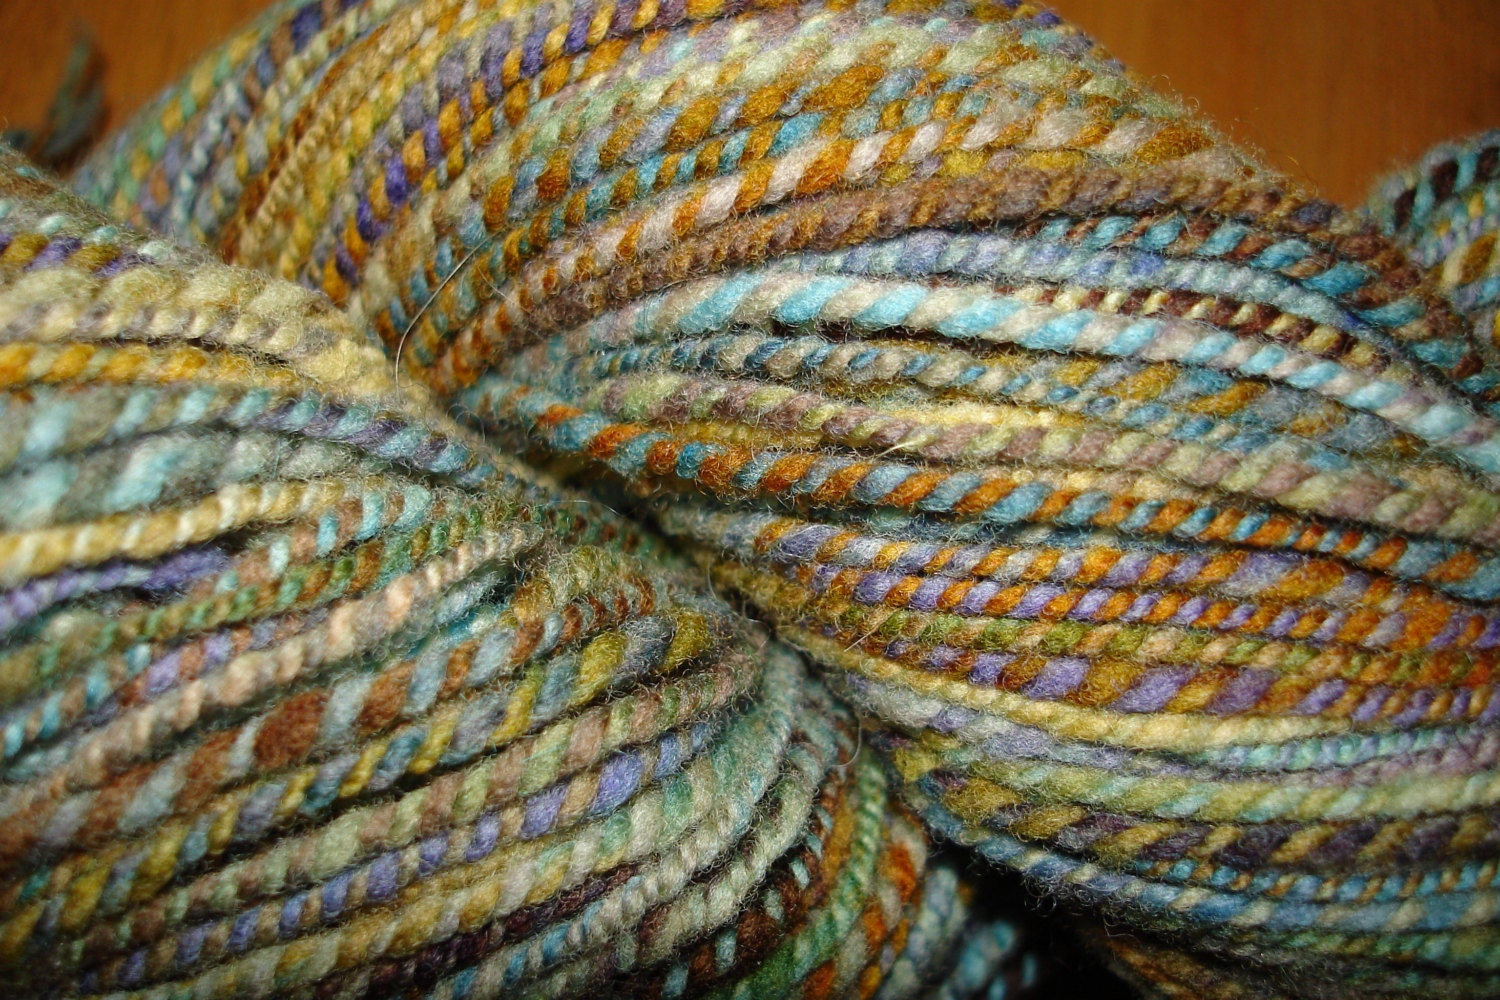 Hand Spun and Dyed "Baby Doll" wool, 330 yards, Worsted Weight - TommieJames